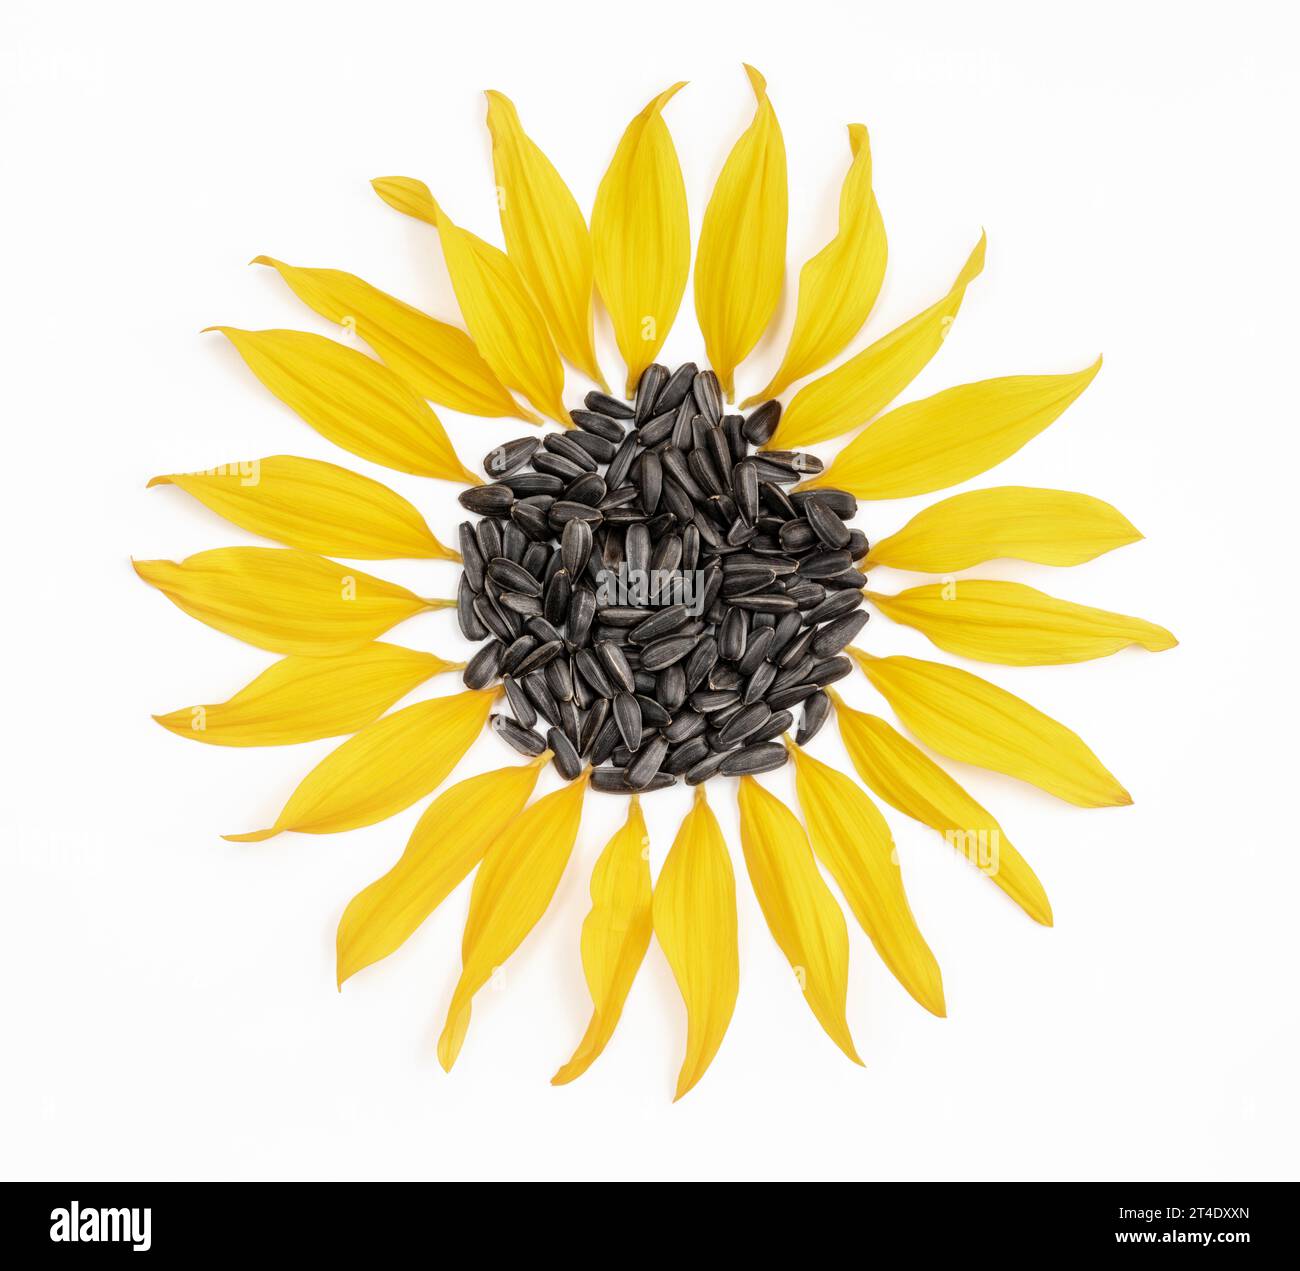 Black sunflower seeds and sunflower petals arranged in a shape of a sunflower Stock Photo